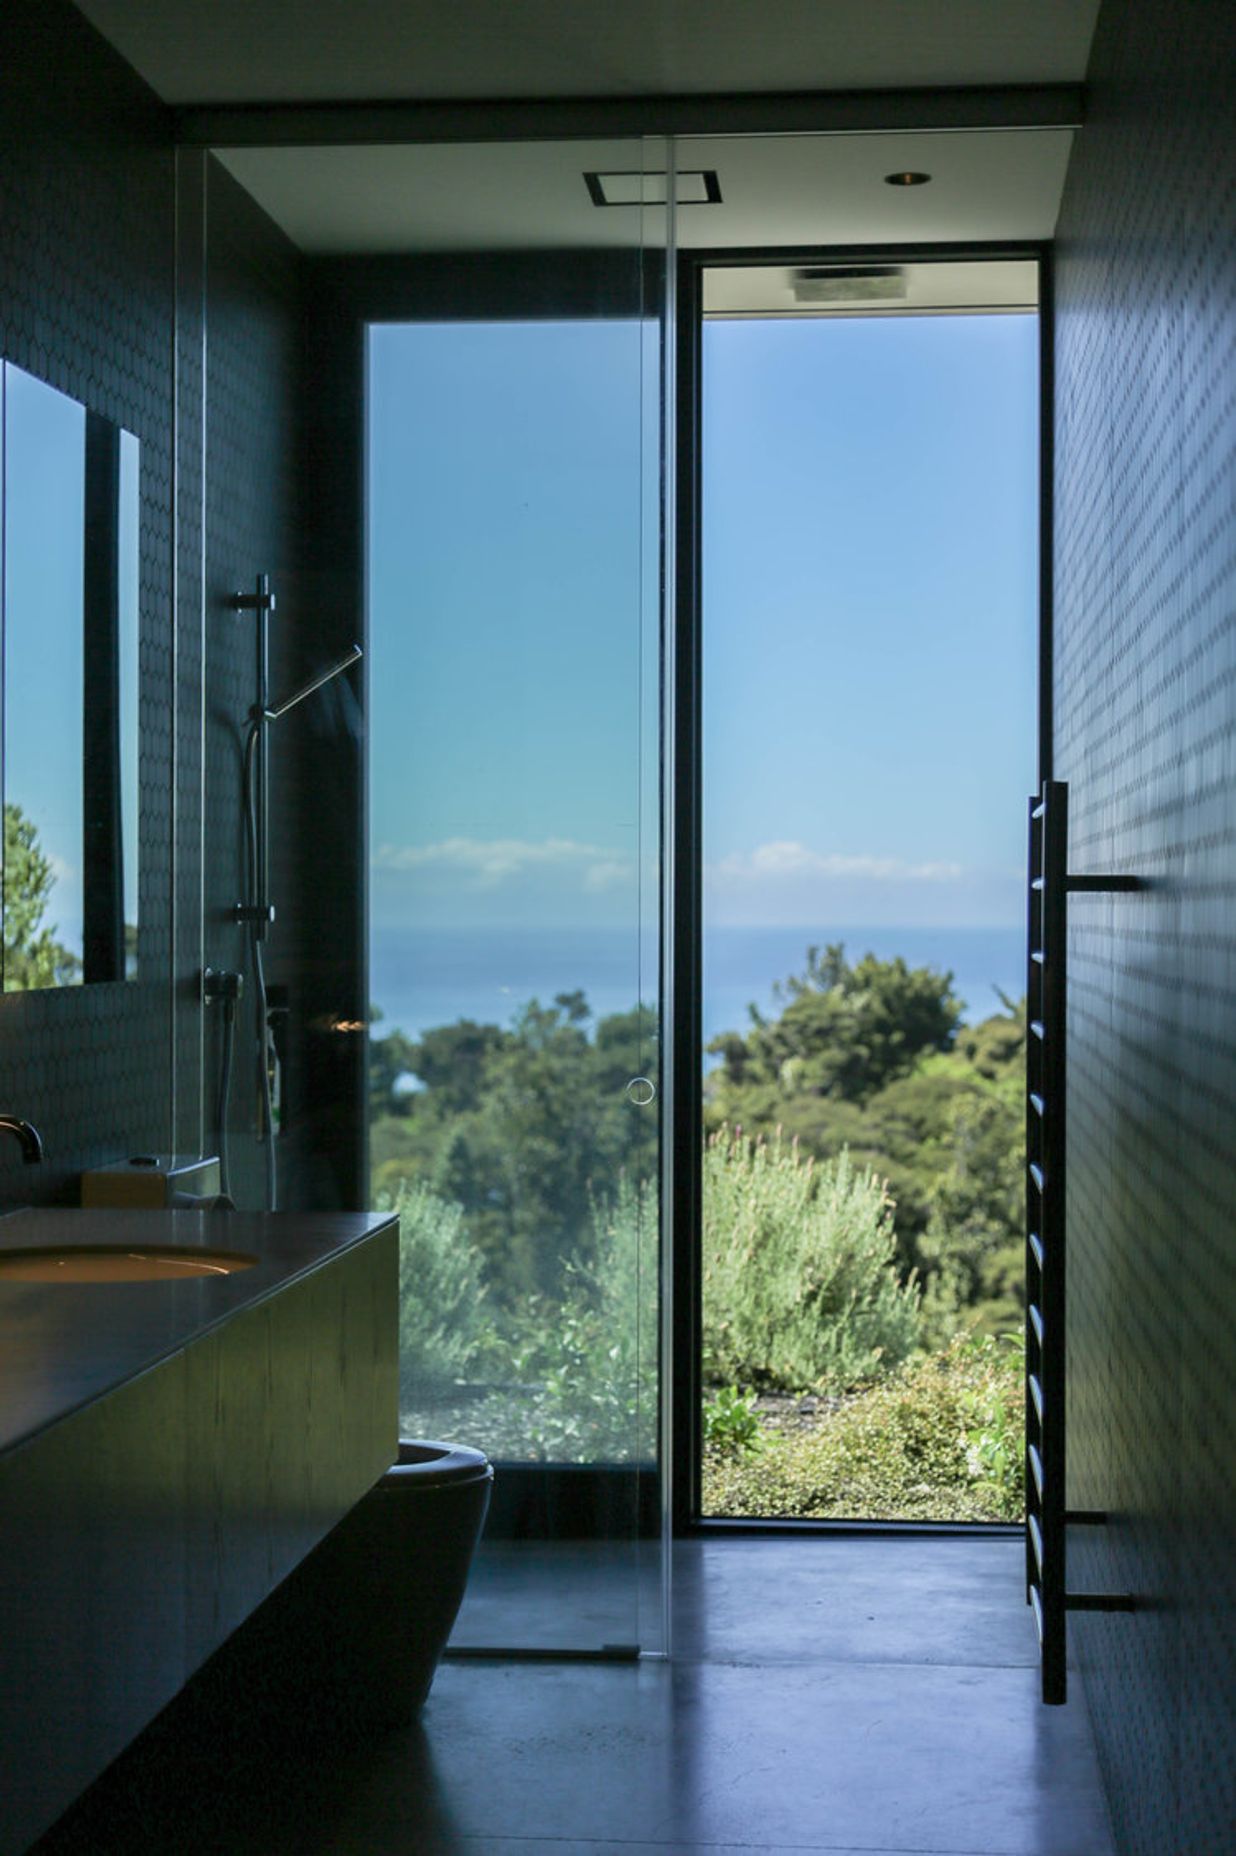 The bathroom on the lower level has a view of bush and sea.